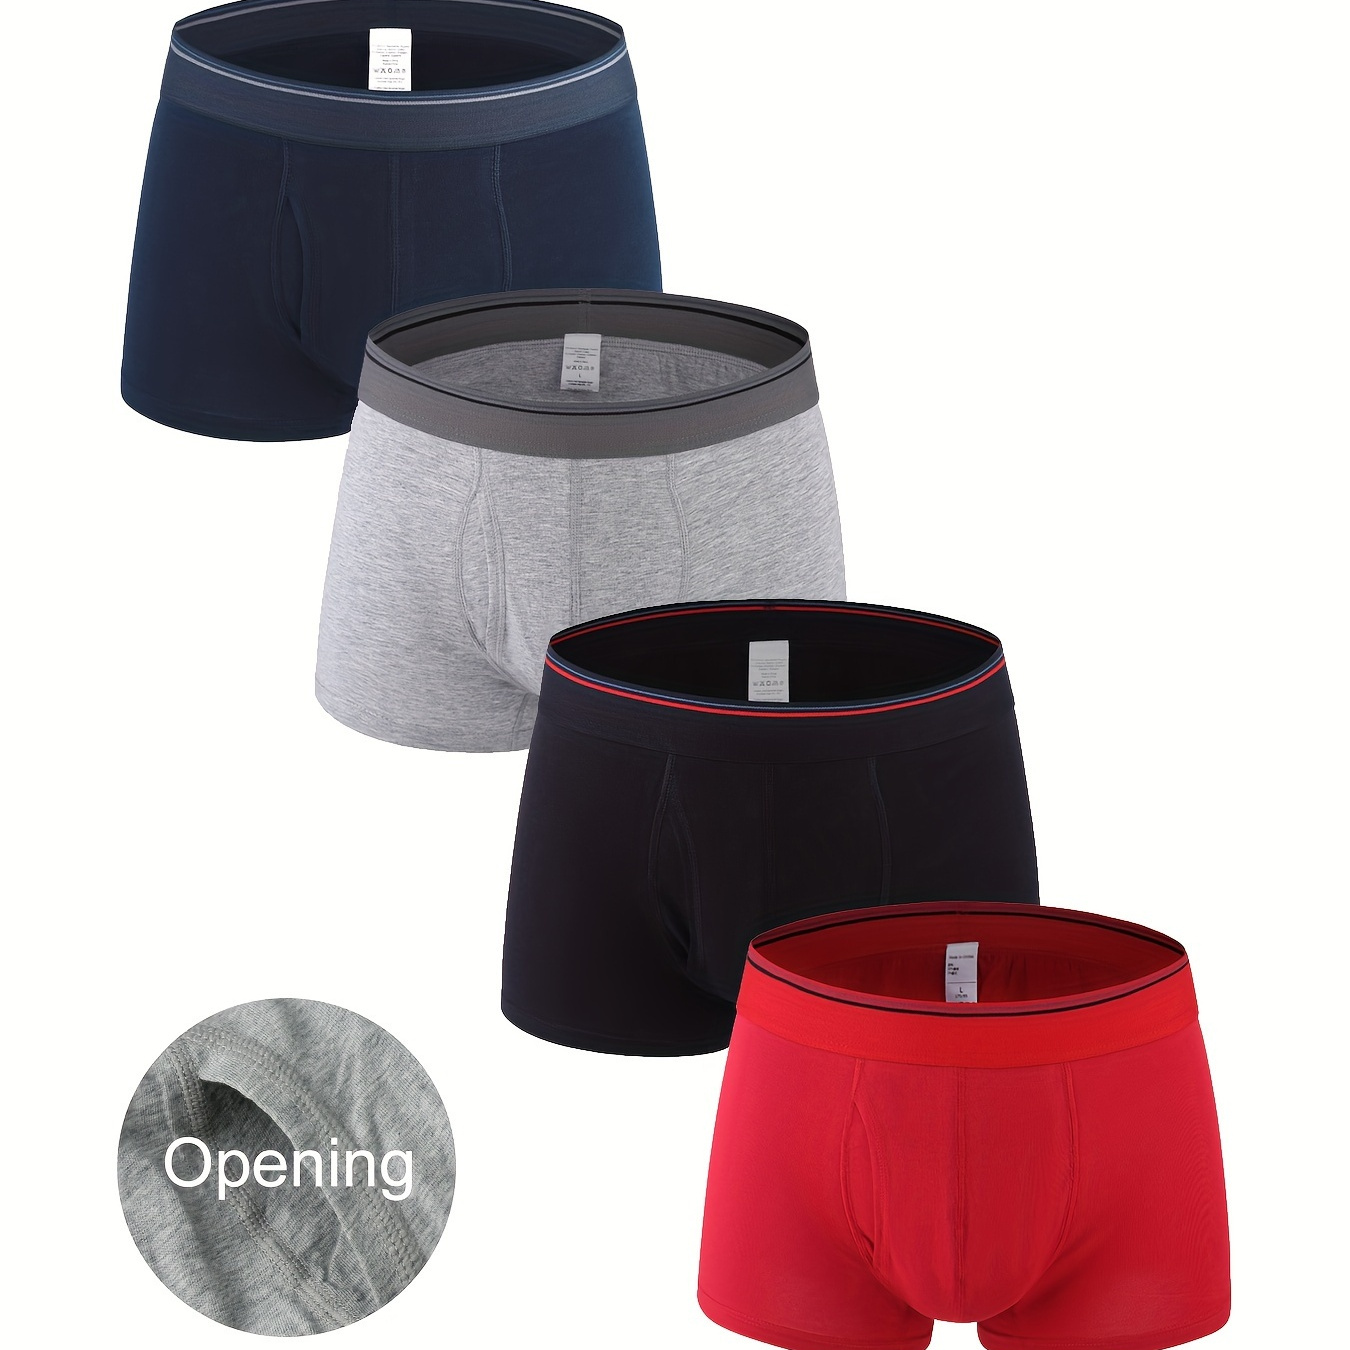 

4pcs Men's Underwear With Fly, Fashion Cotton Breathable Comfy Stretchy Boxer Briefs Shorts, Casual Boxer Trunks